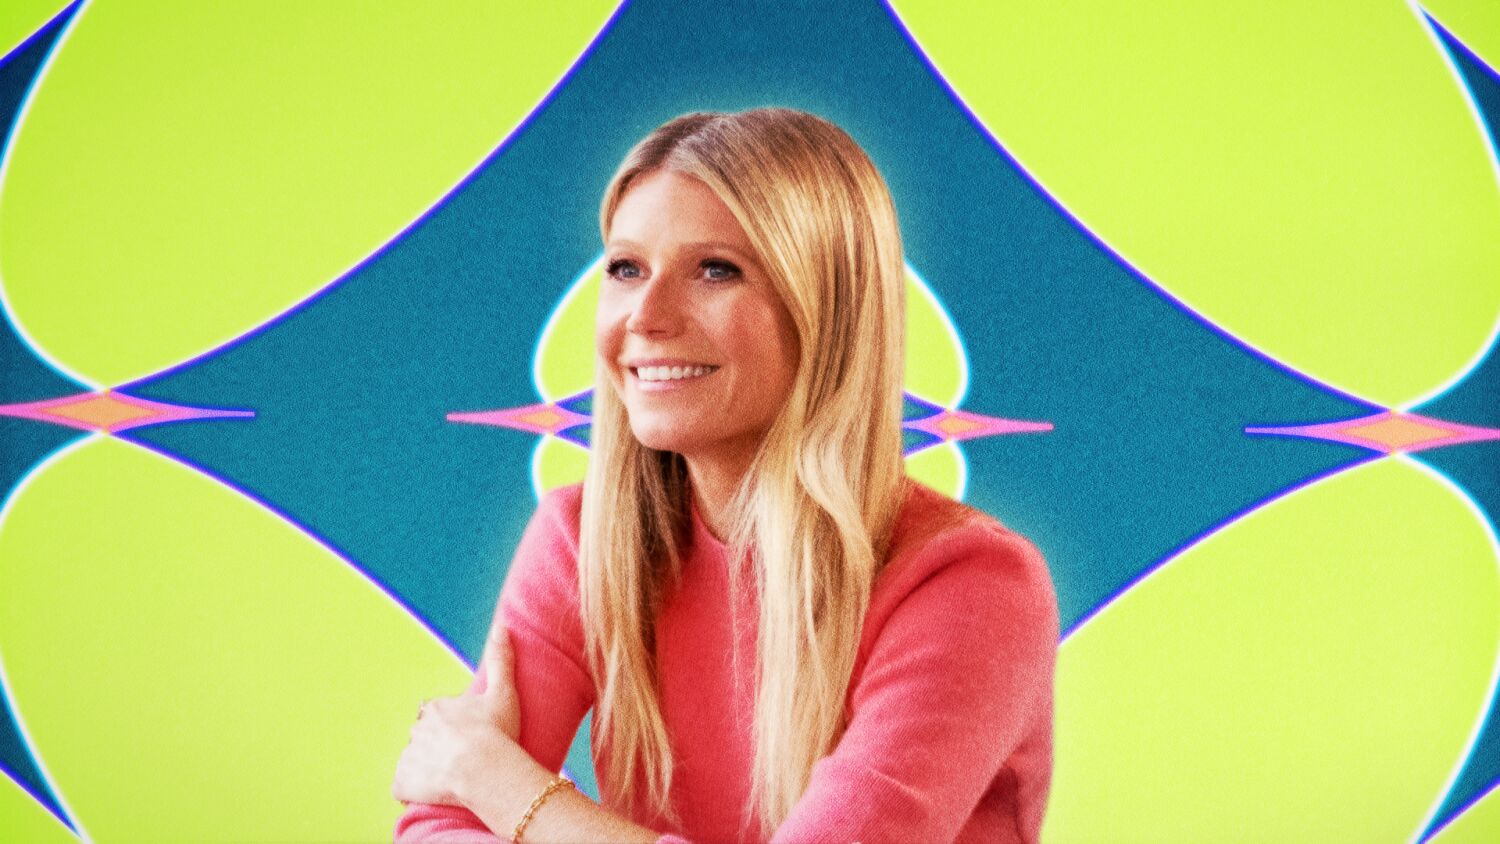 Inside Gwyneth Paltrow's $1,600 hormone summit there's plenty of Goop, but also some good